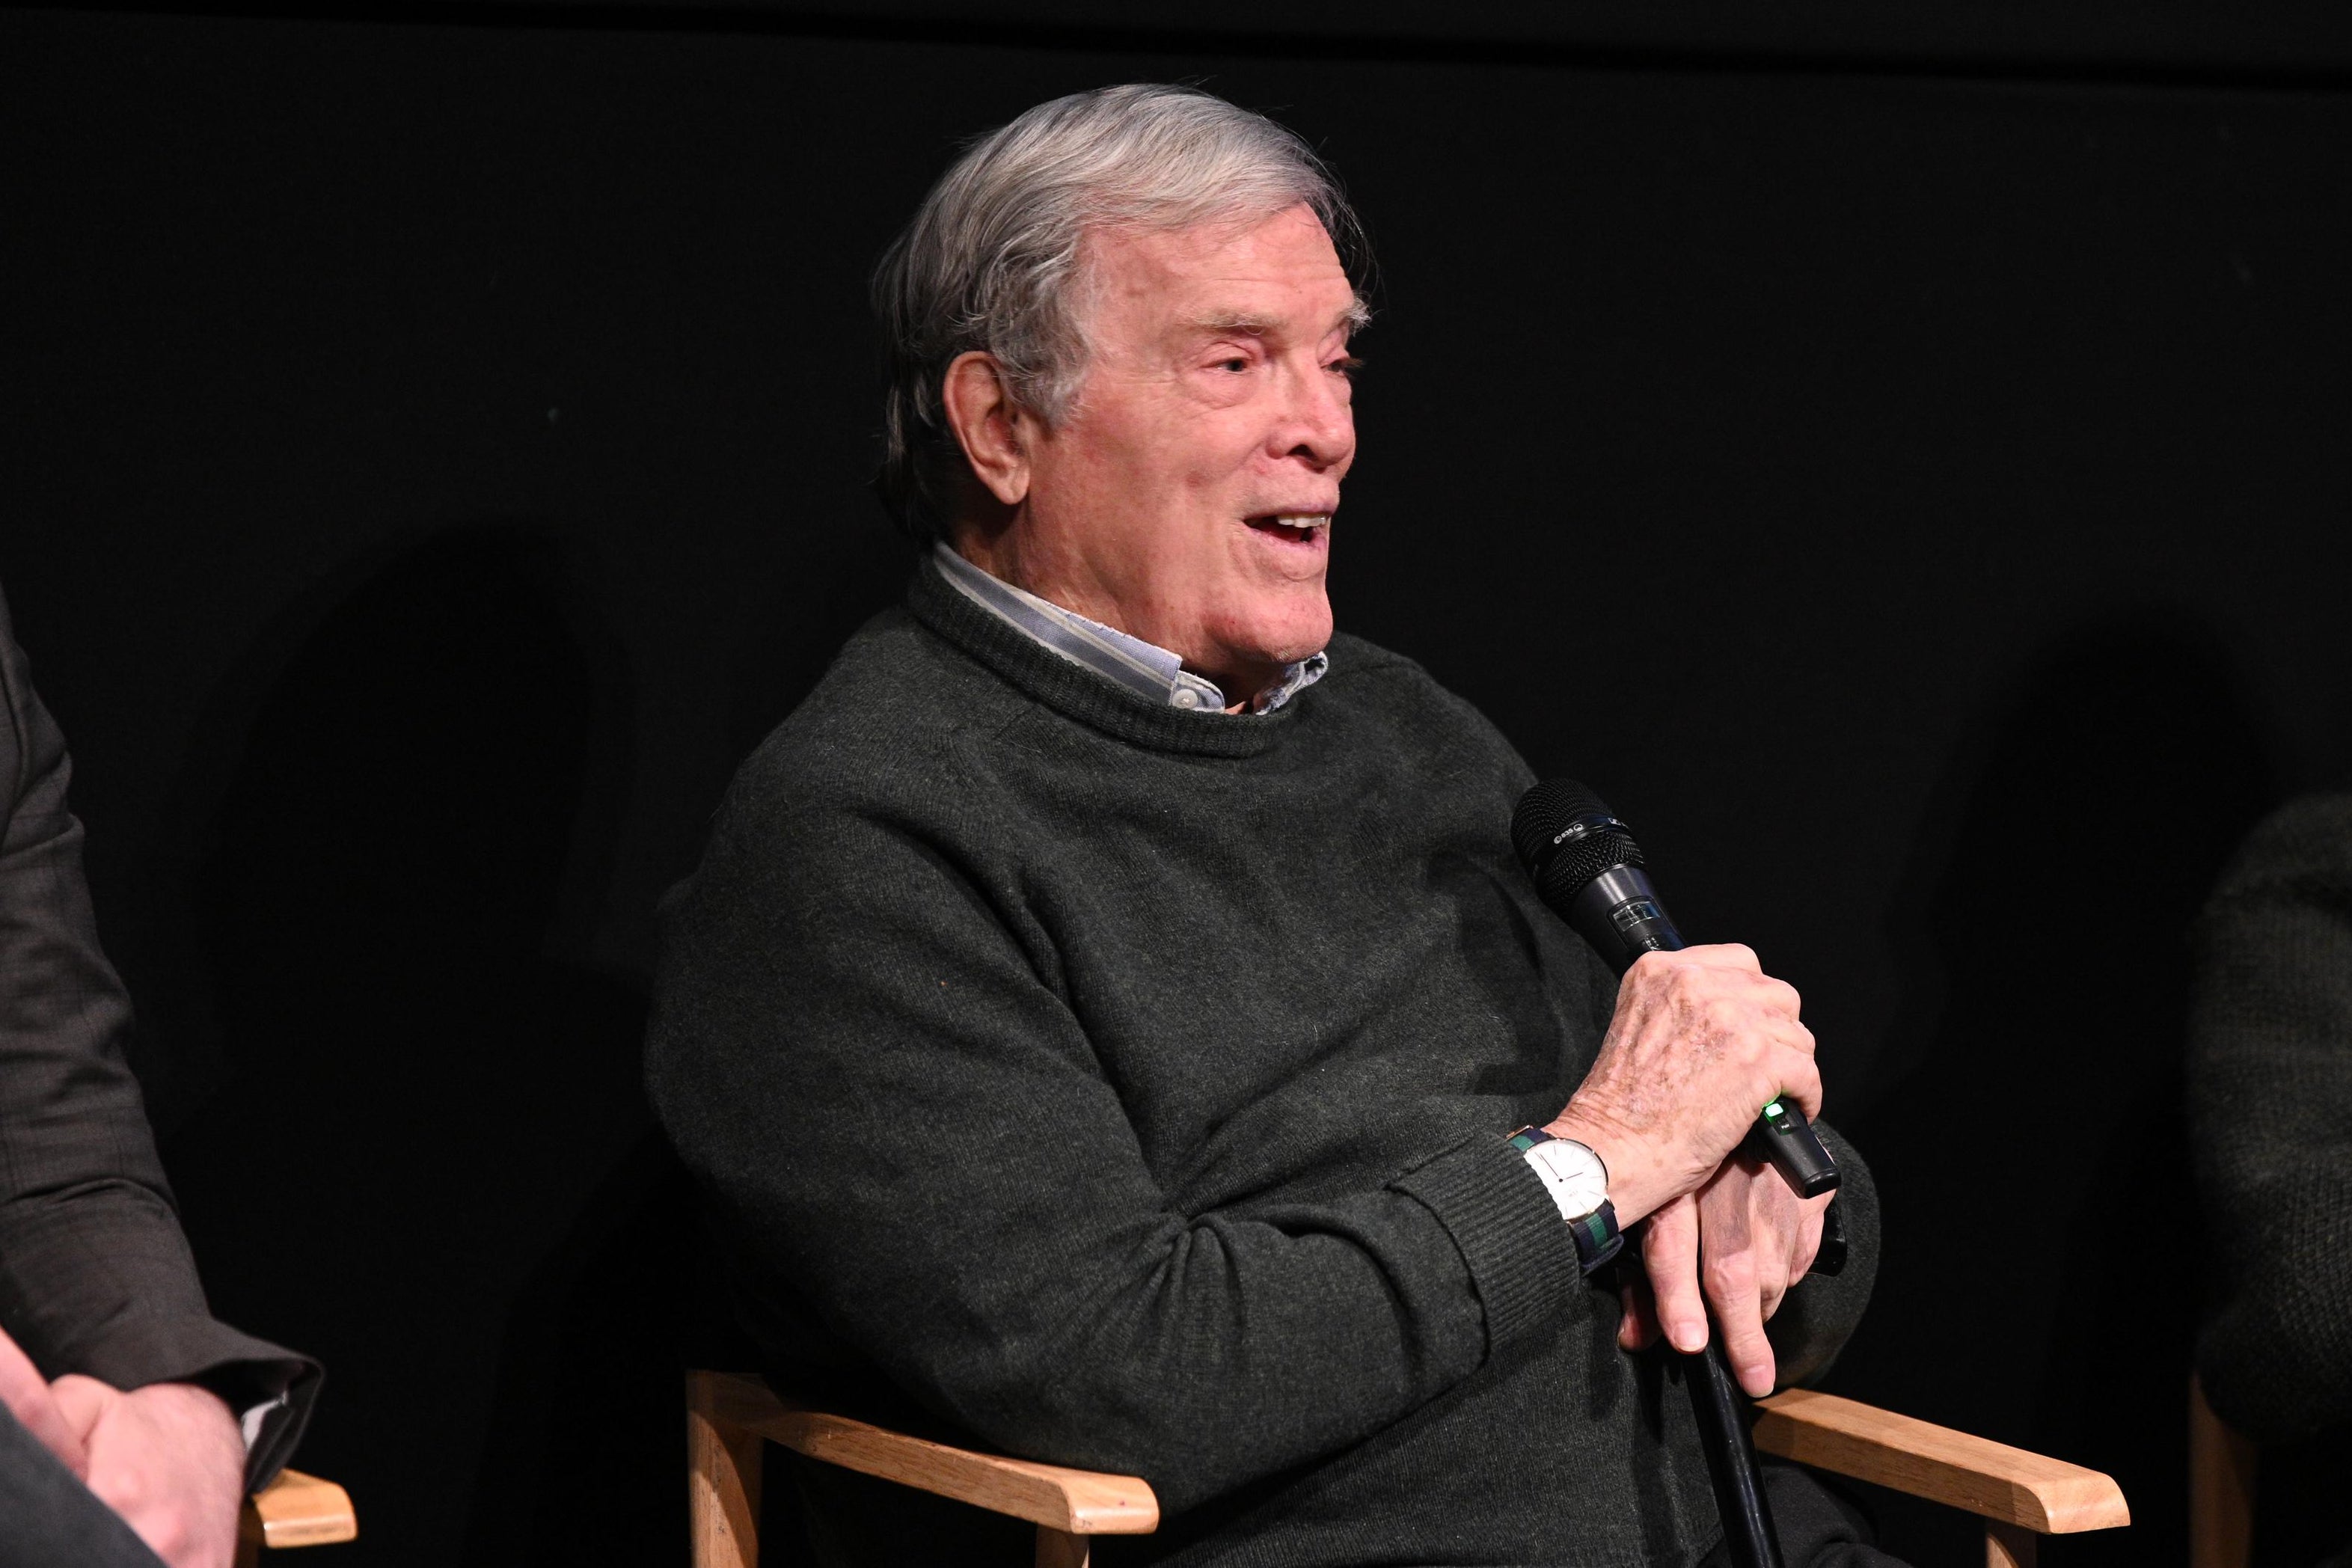 D.A. Pennebaker, sitting in a director's chair onstage, laughs during a Q&A.